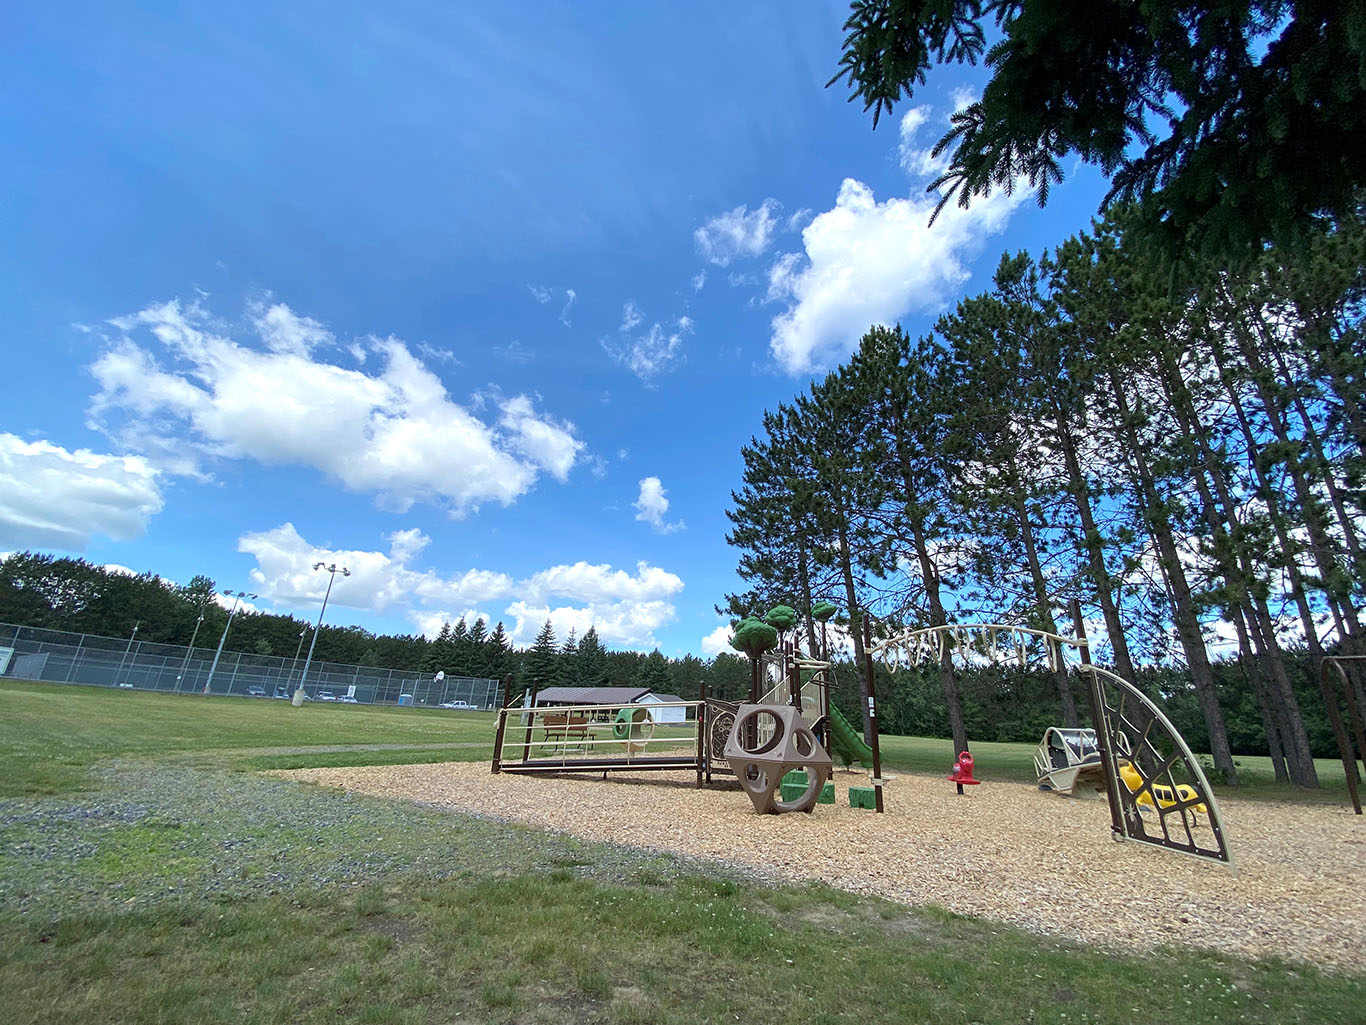 Image shows a playground with towering pine trees in the background.